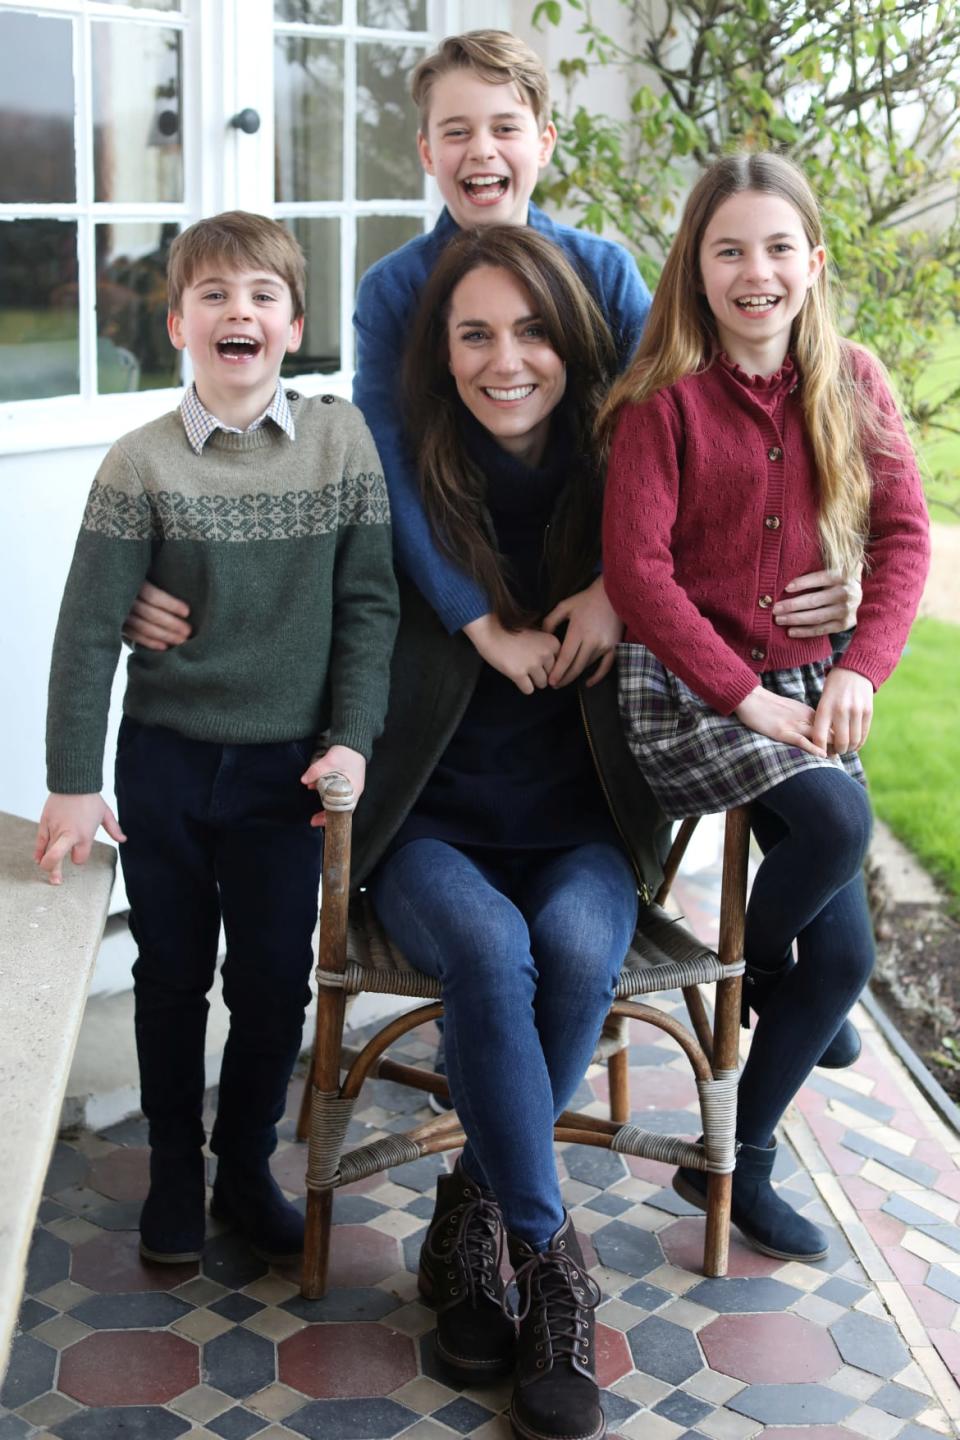 The UK Mother's Day photo Prince William allegedly took of Kate Middleton and their children, which Kate later admitted to doctoring.